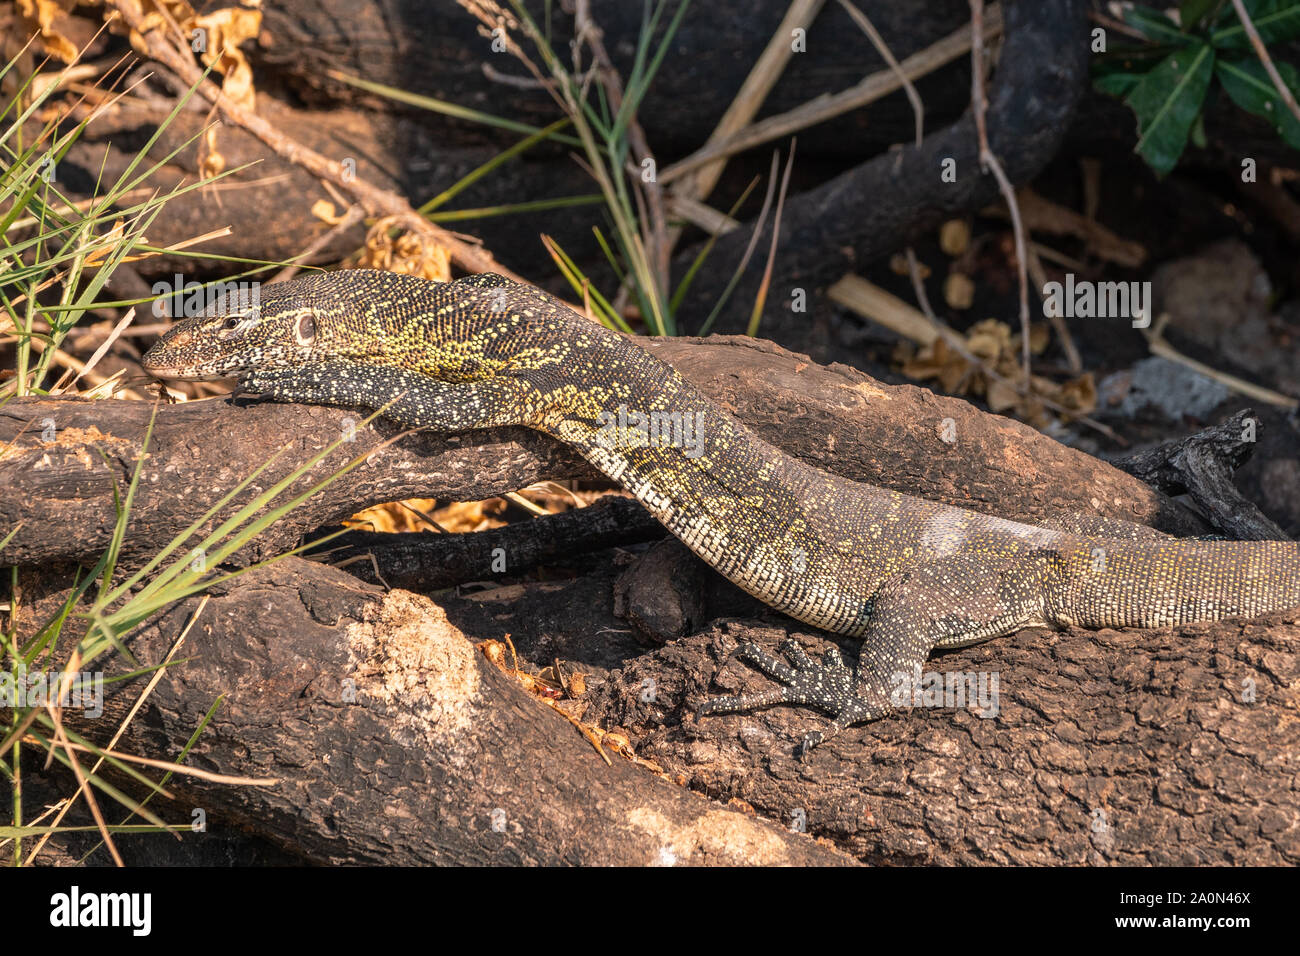 Nile Monitor Lizard Resting and Sunbathing on a Root in Chobe National Park, Botswana, Africa Stock Photo